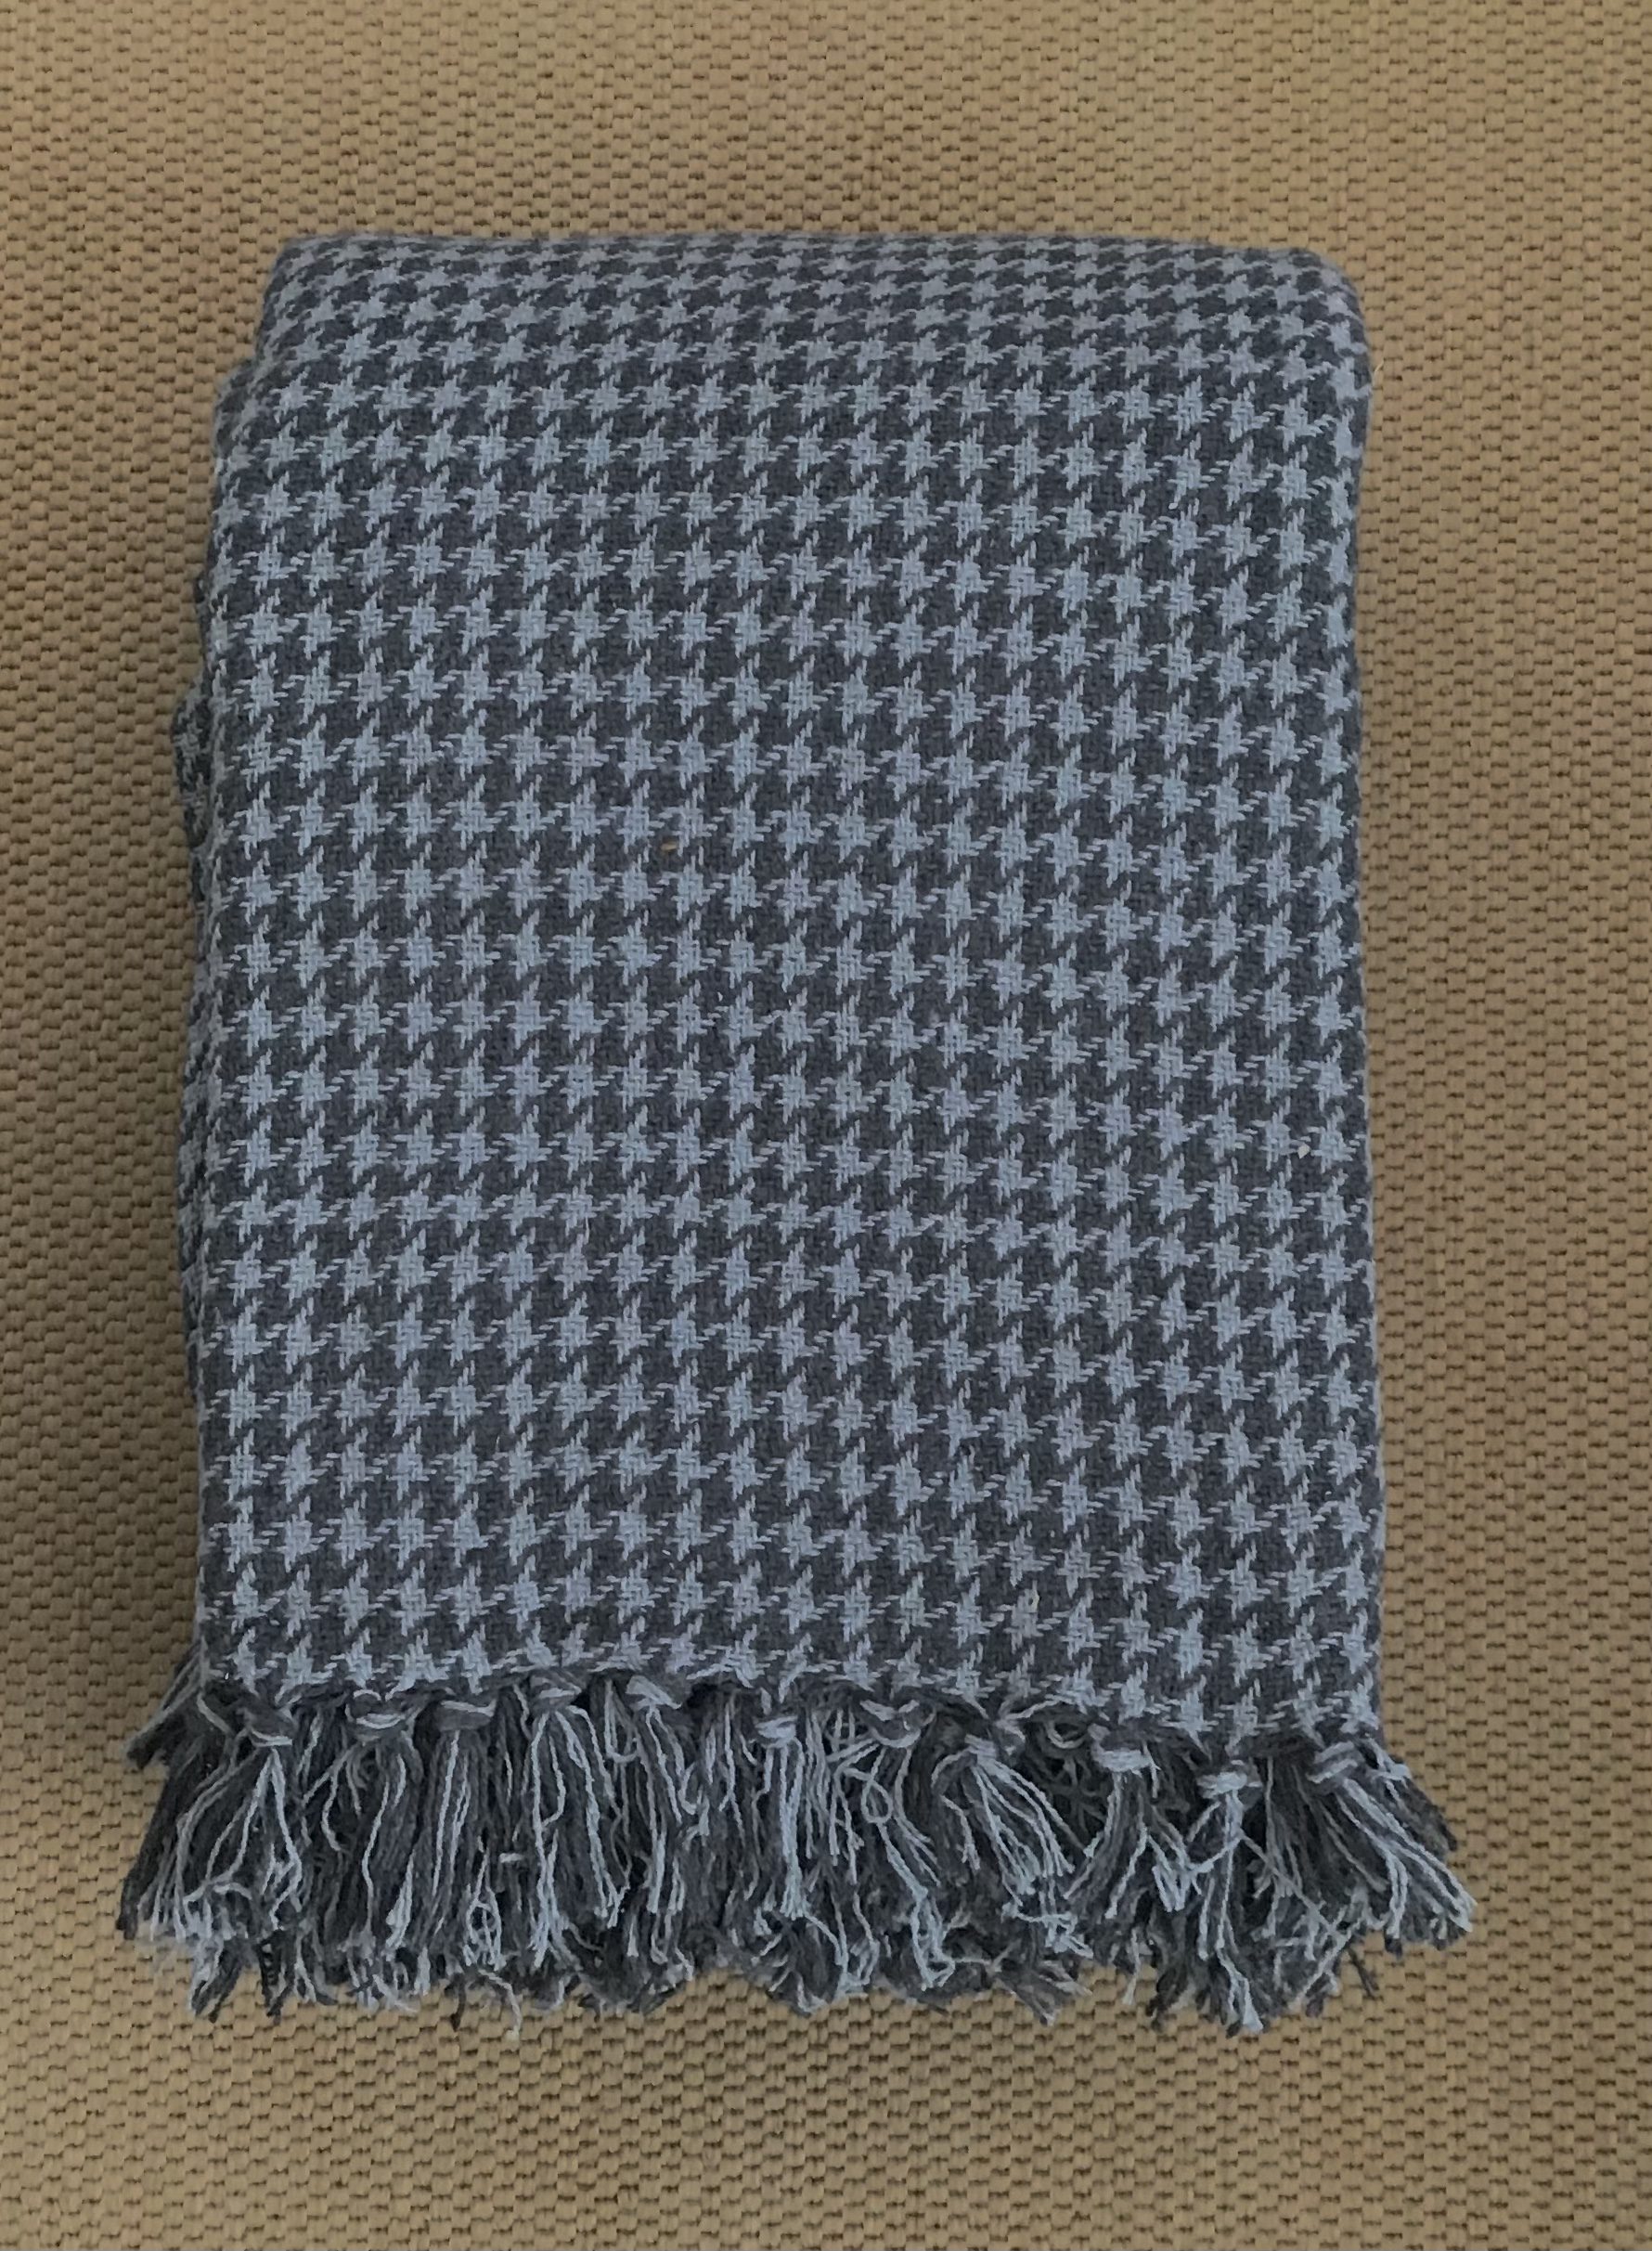 100% Cotton Grey and Charcoal Houndstooth Throws – The Sofa Throw Company